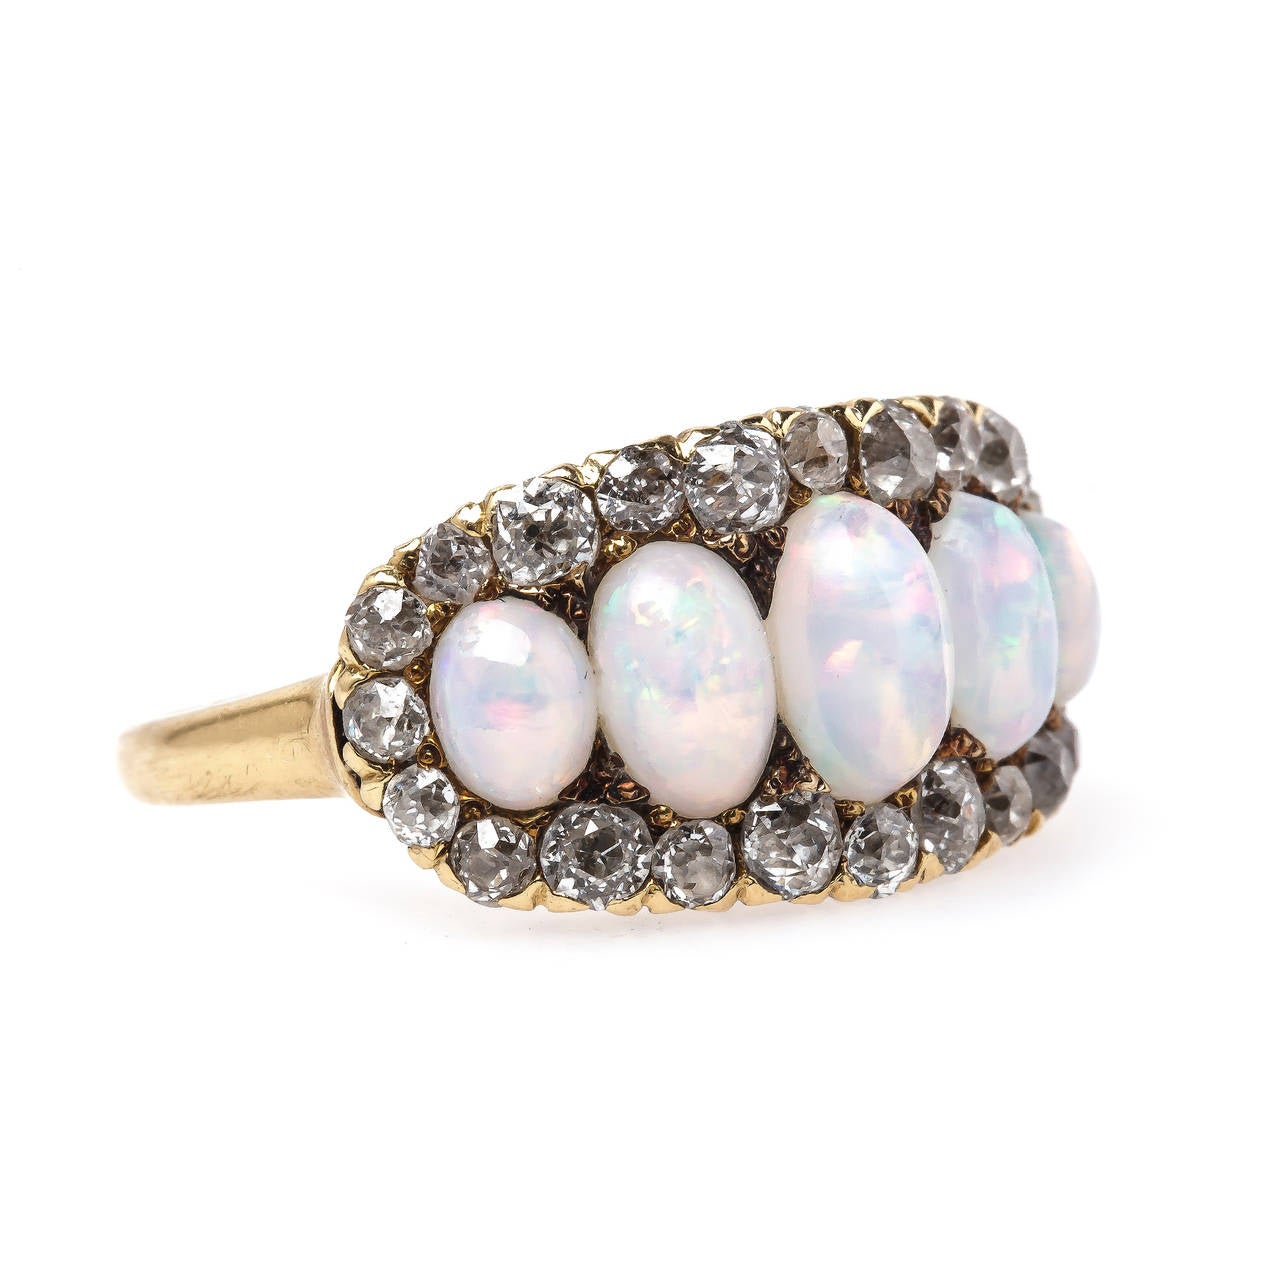 Coachella is a favorite here at T&H! The whimsical authentic Victorian era (circa 1890) 18k yellow gold ring features five beautiful oval opals gauged from 7.10mm x 4.6mm to 4.7mm x 3.5mm displaying a beautiful rainbow play of color in each.